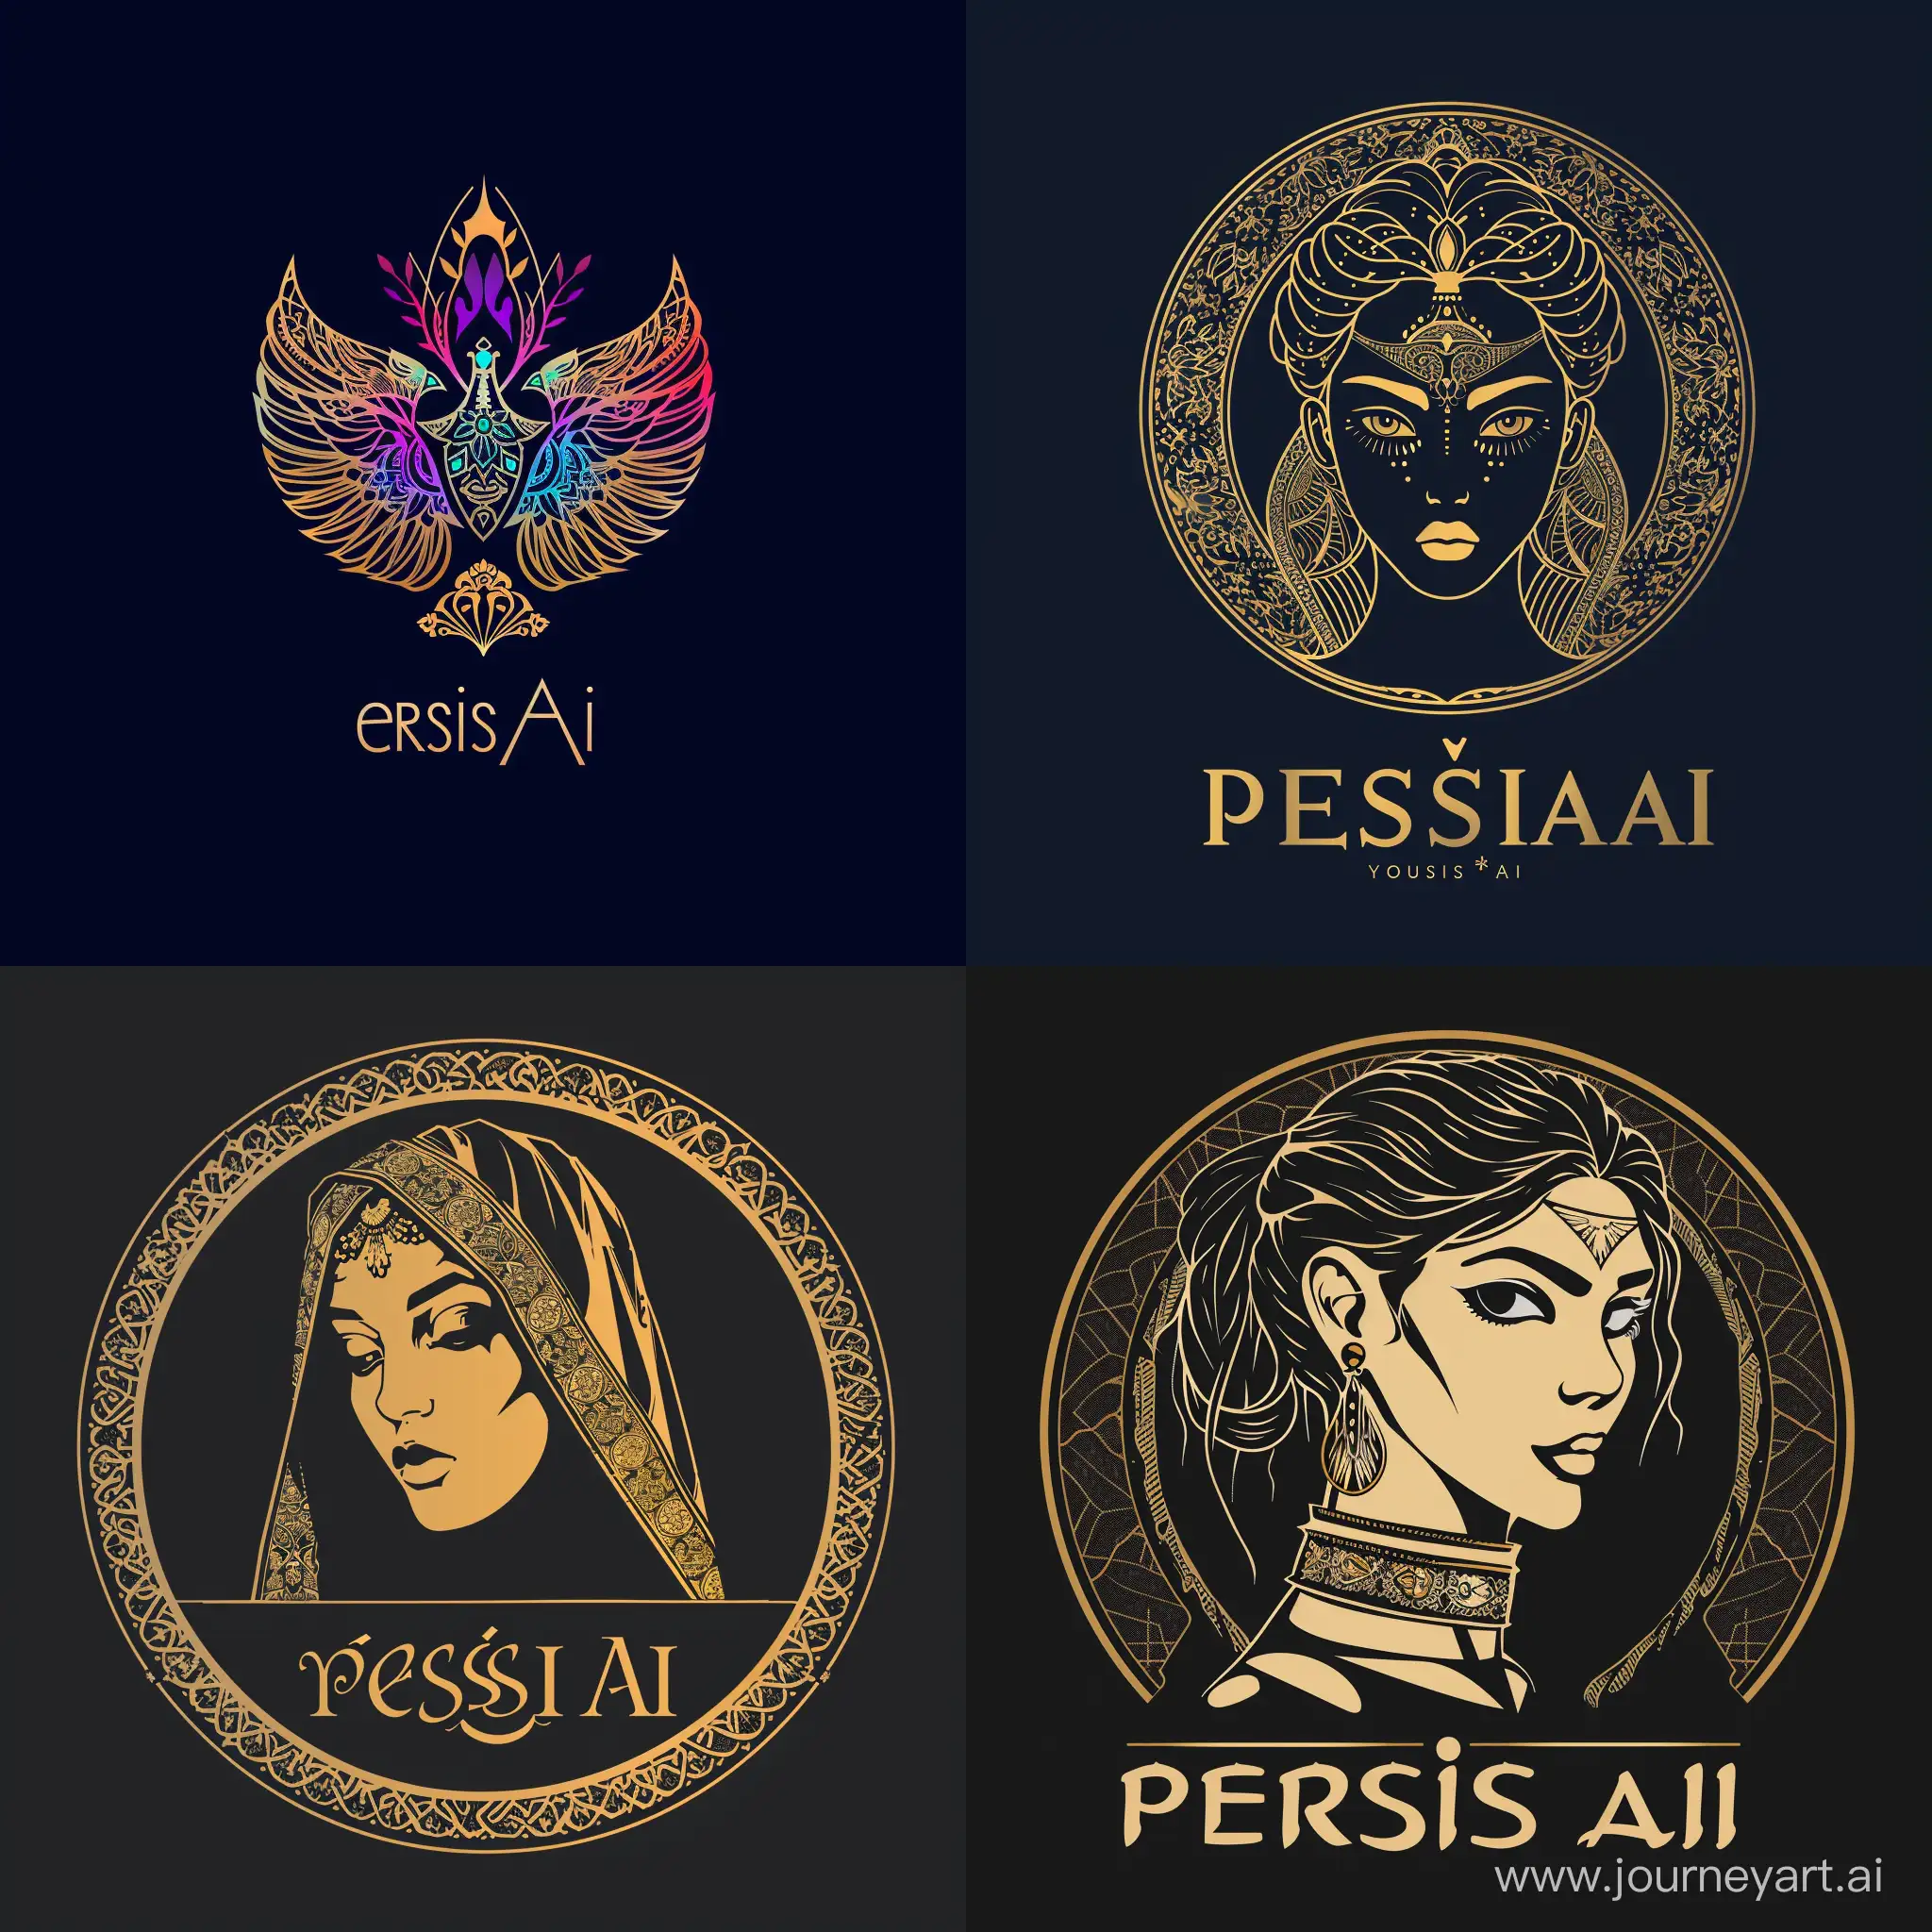 give me a logo for youtube channel named persis ai and related to persian culture